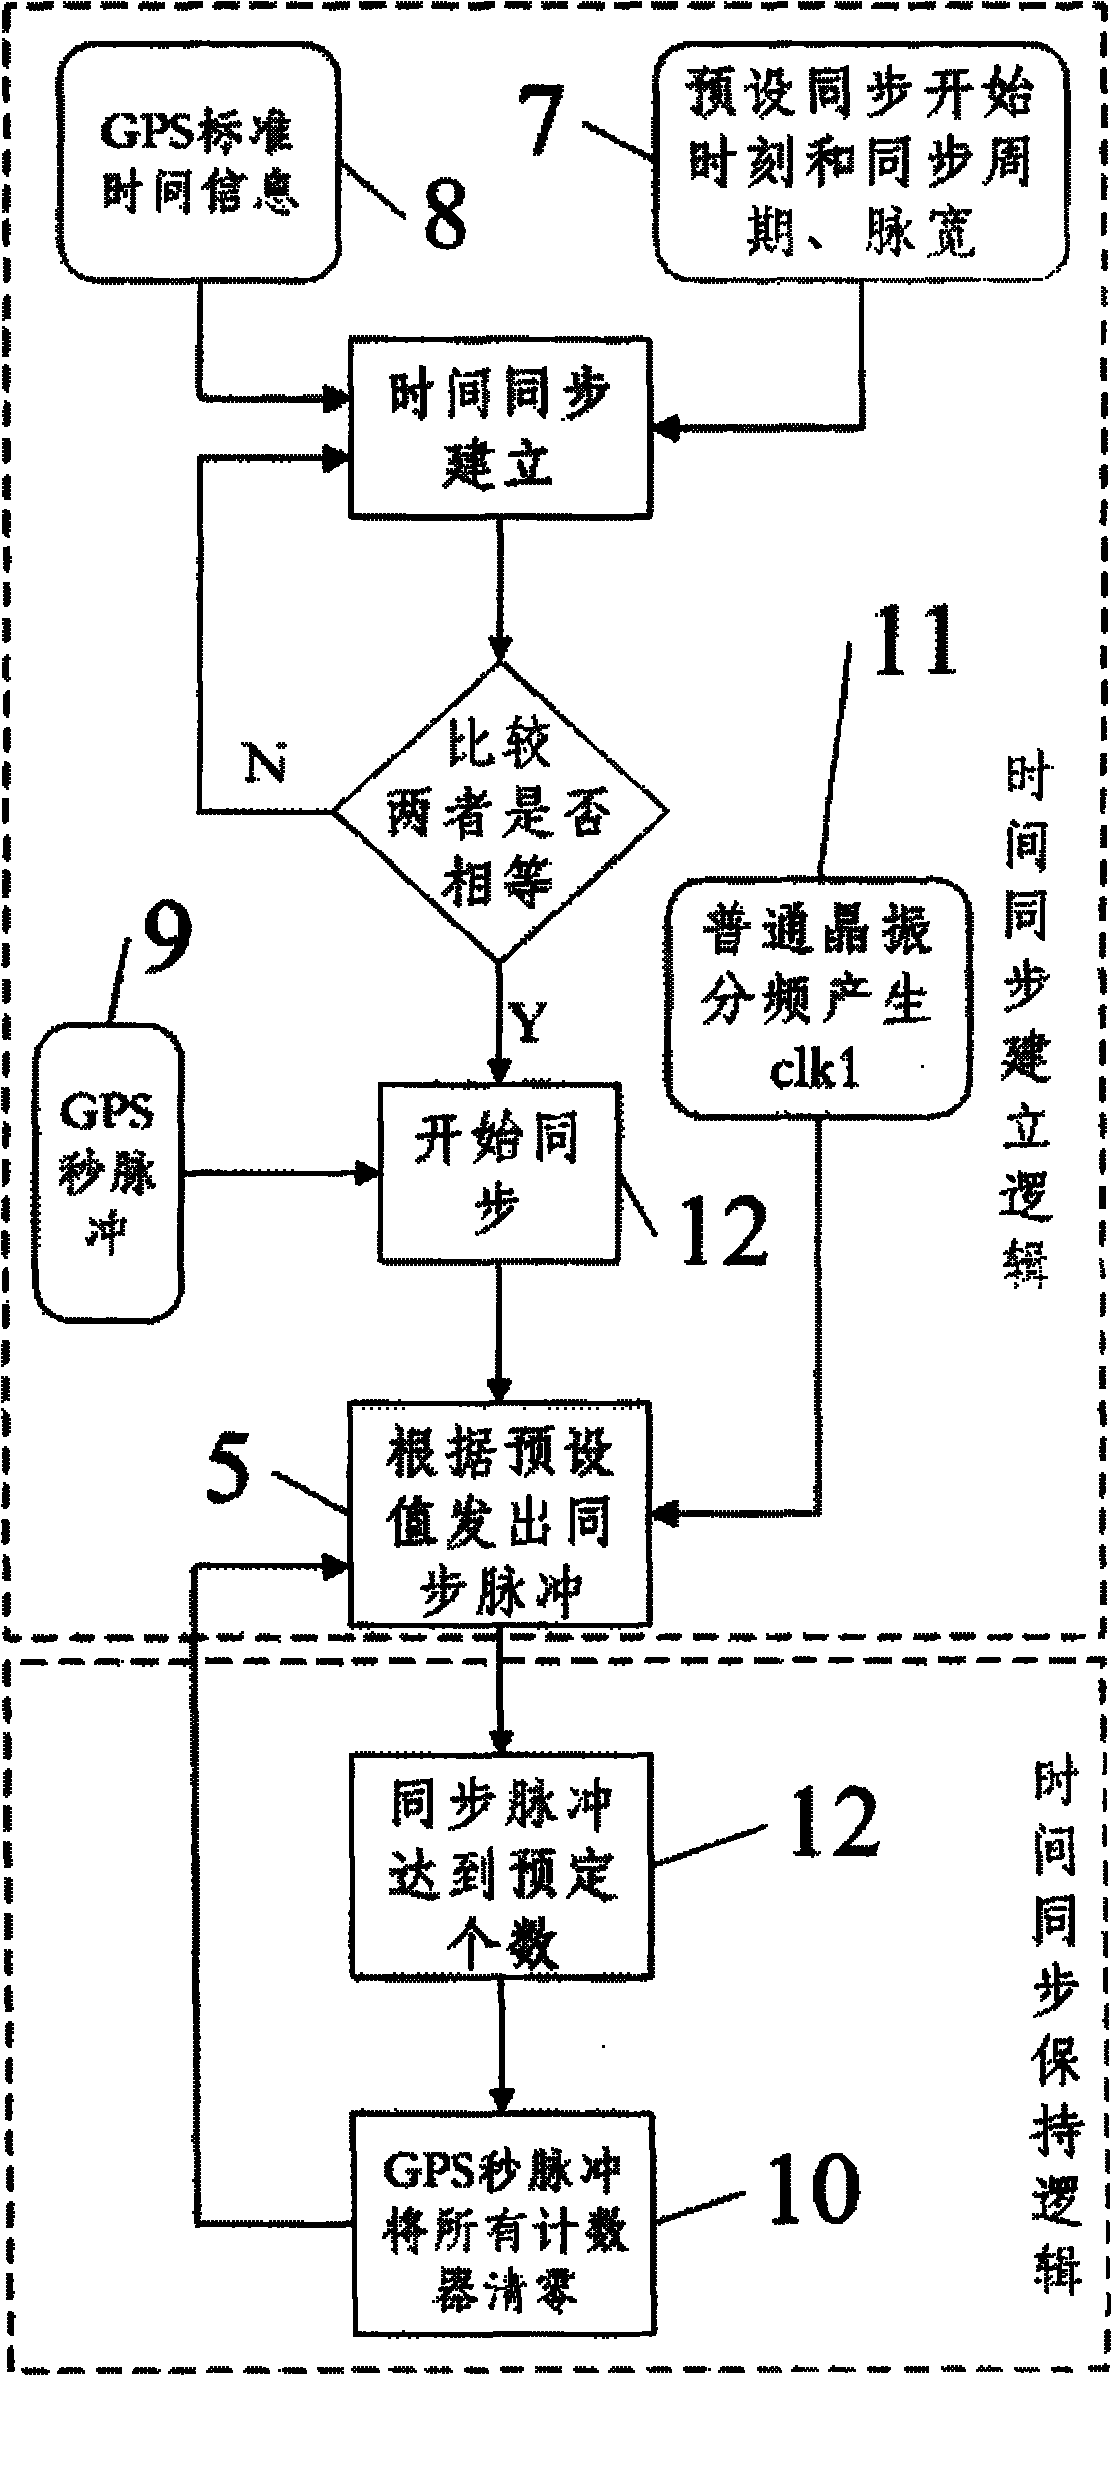 GPS clock synchronization method for distributed acoustic positioning system